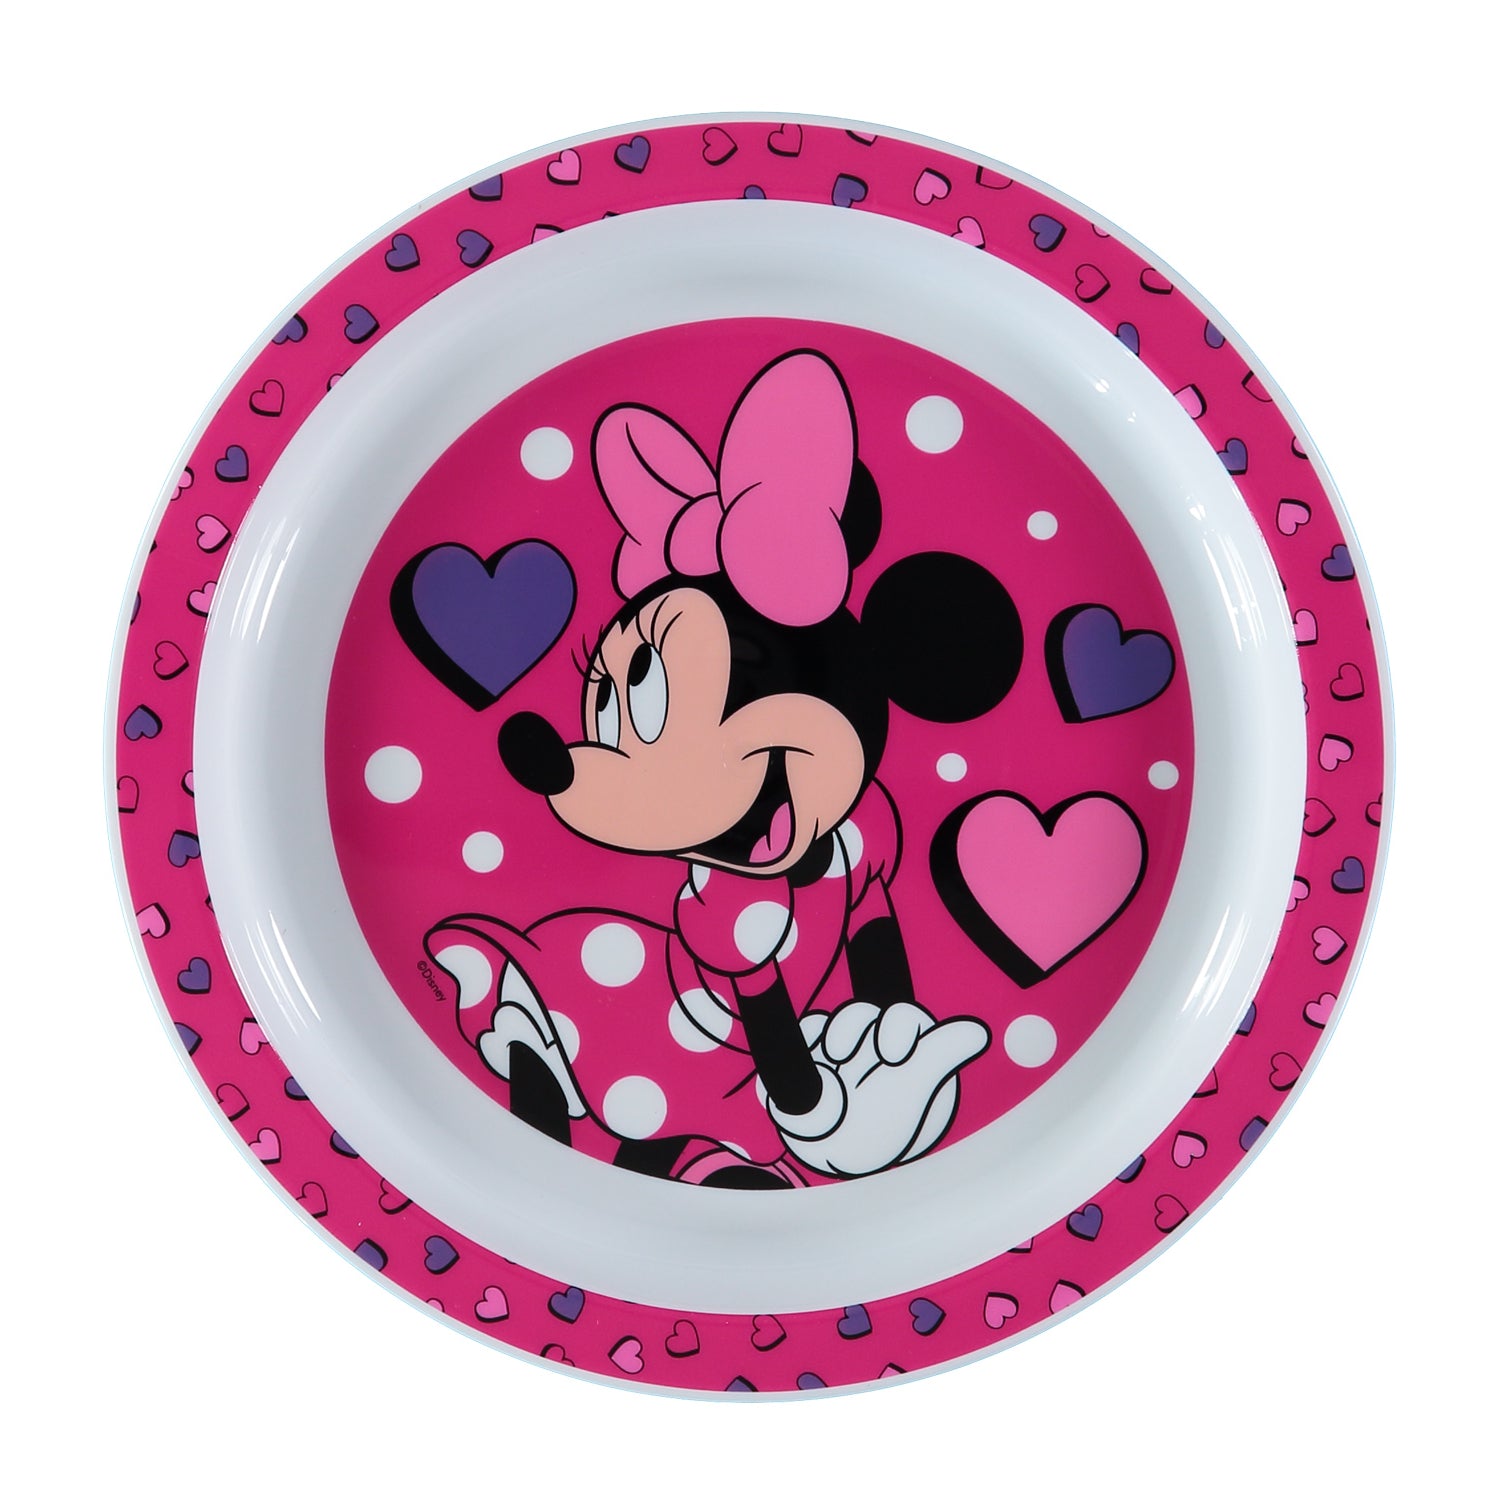 Disney Baby Minnie Mouse 3-Piece Dinner Set: Plate, Bowl and Cup